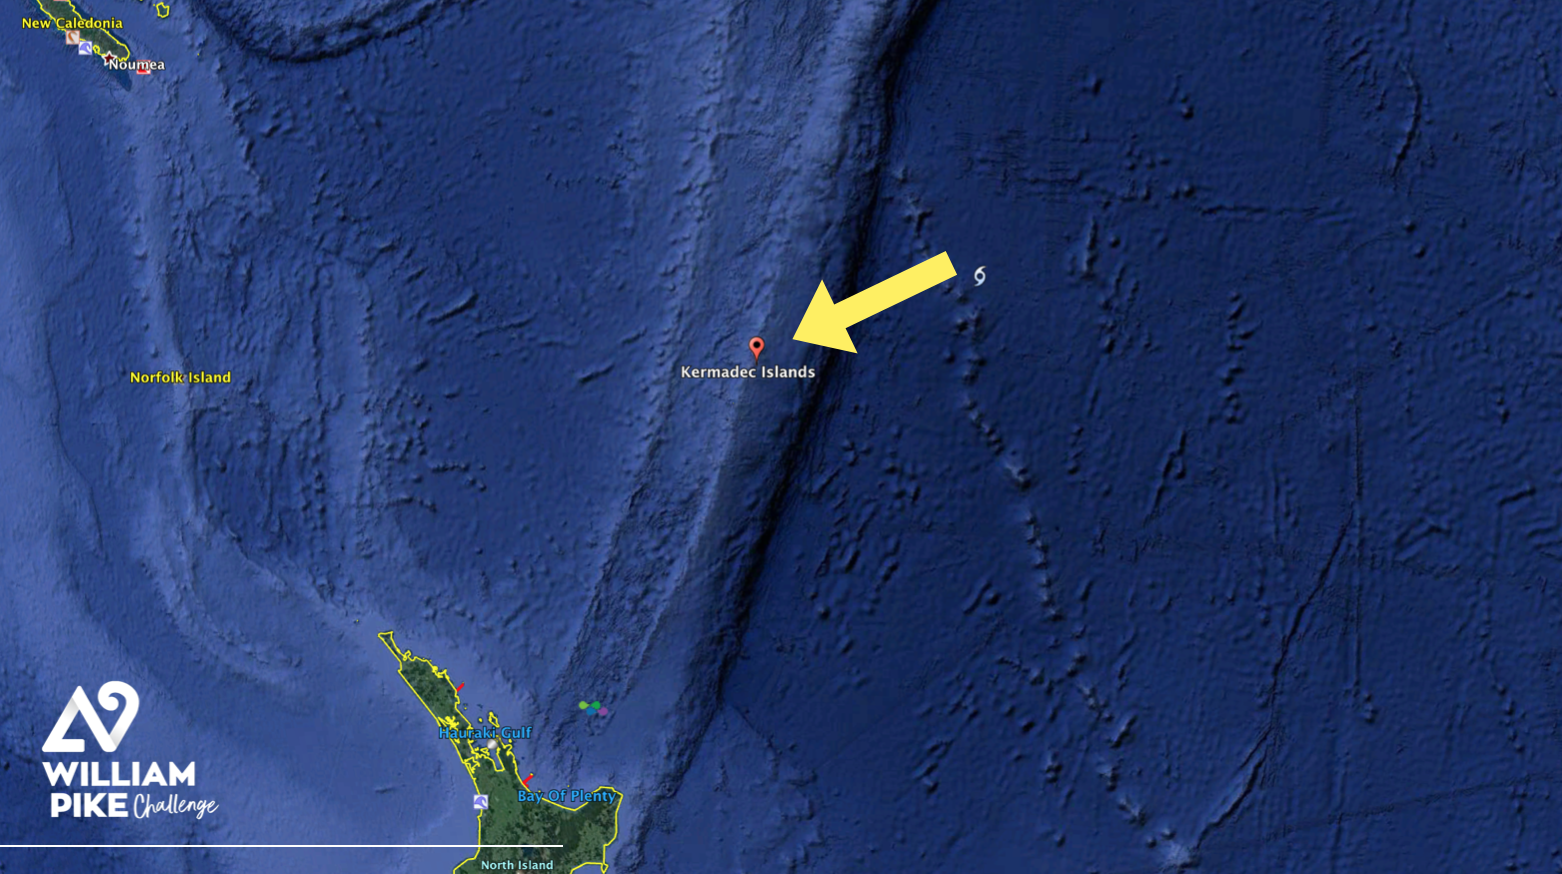 Map showing the Kermadec Islands